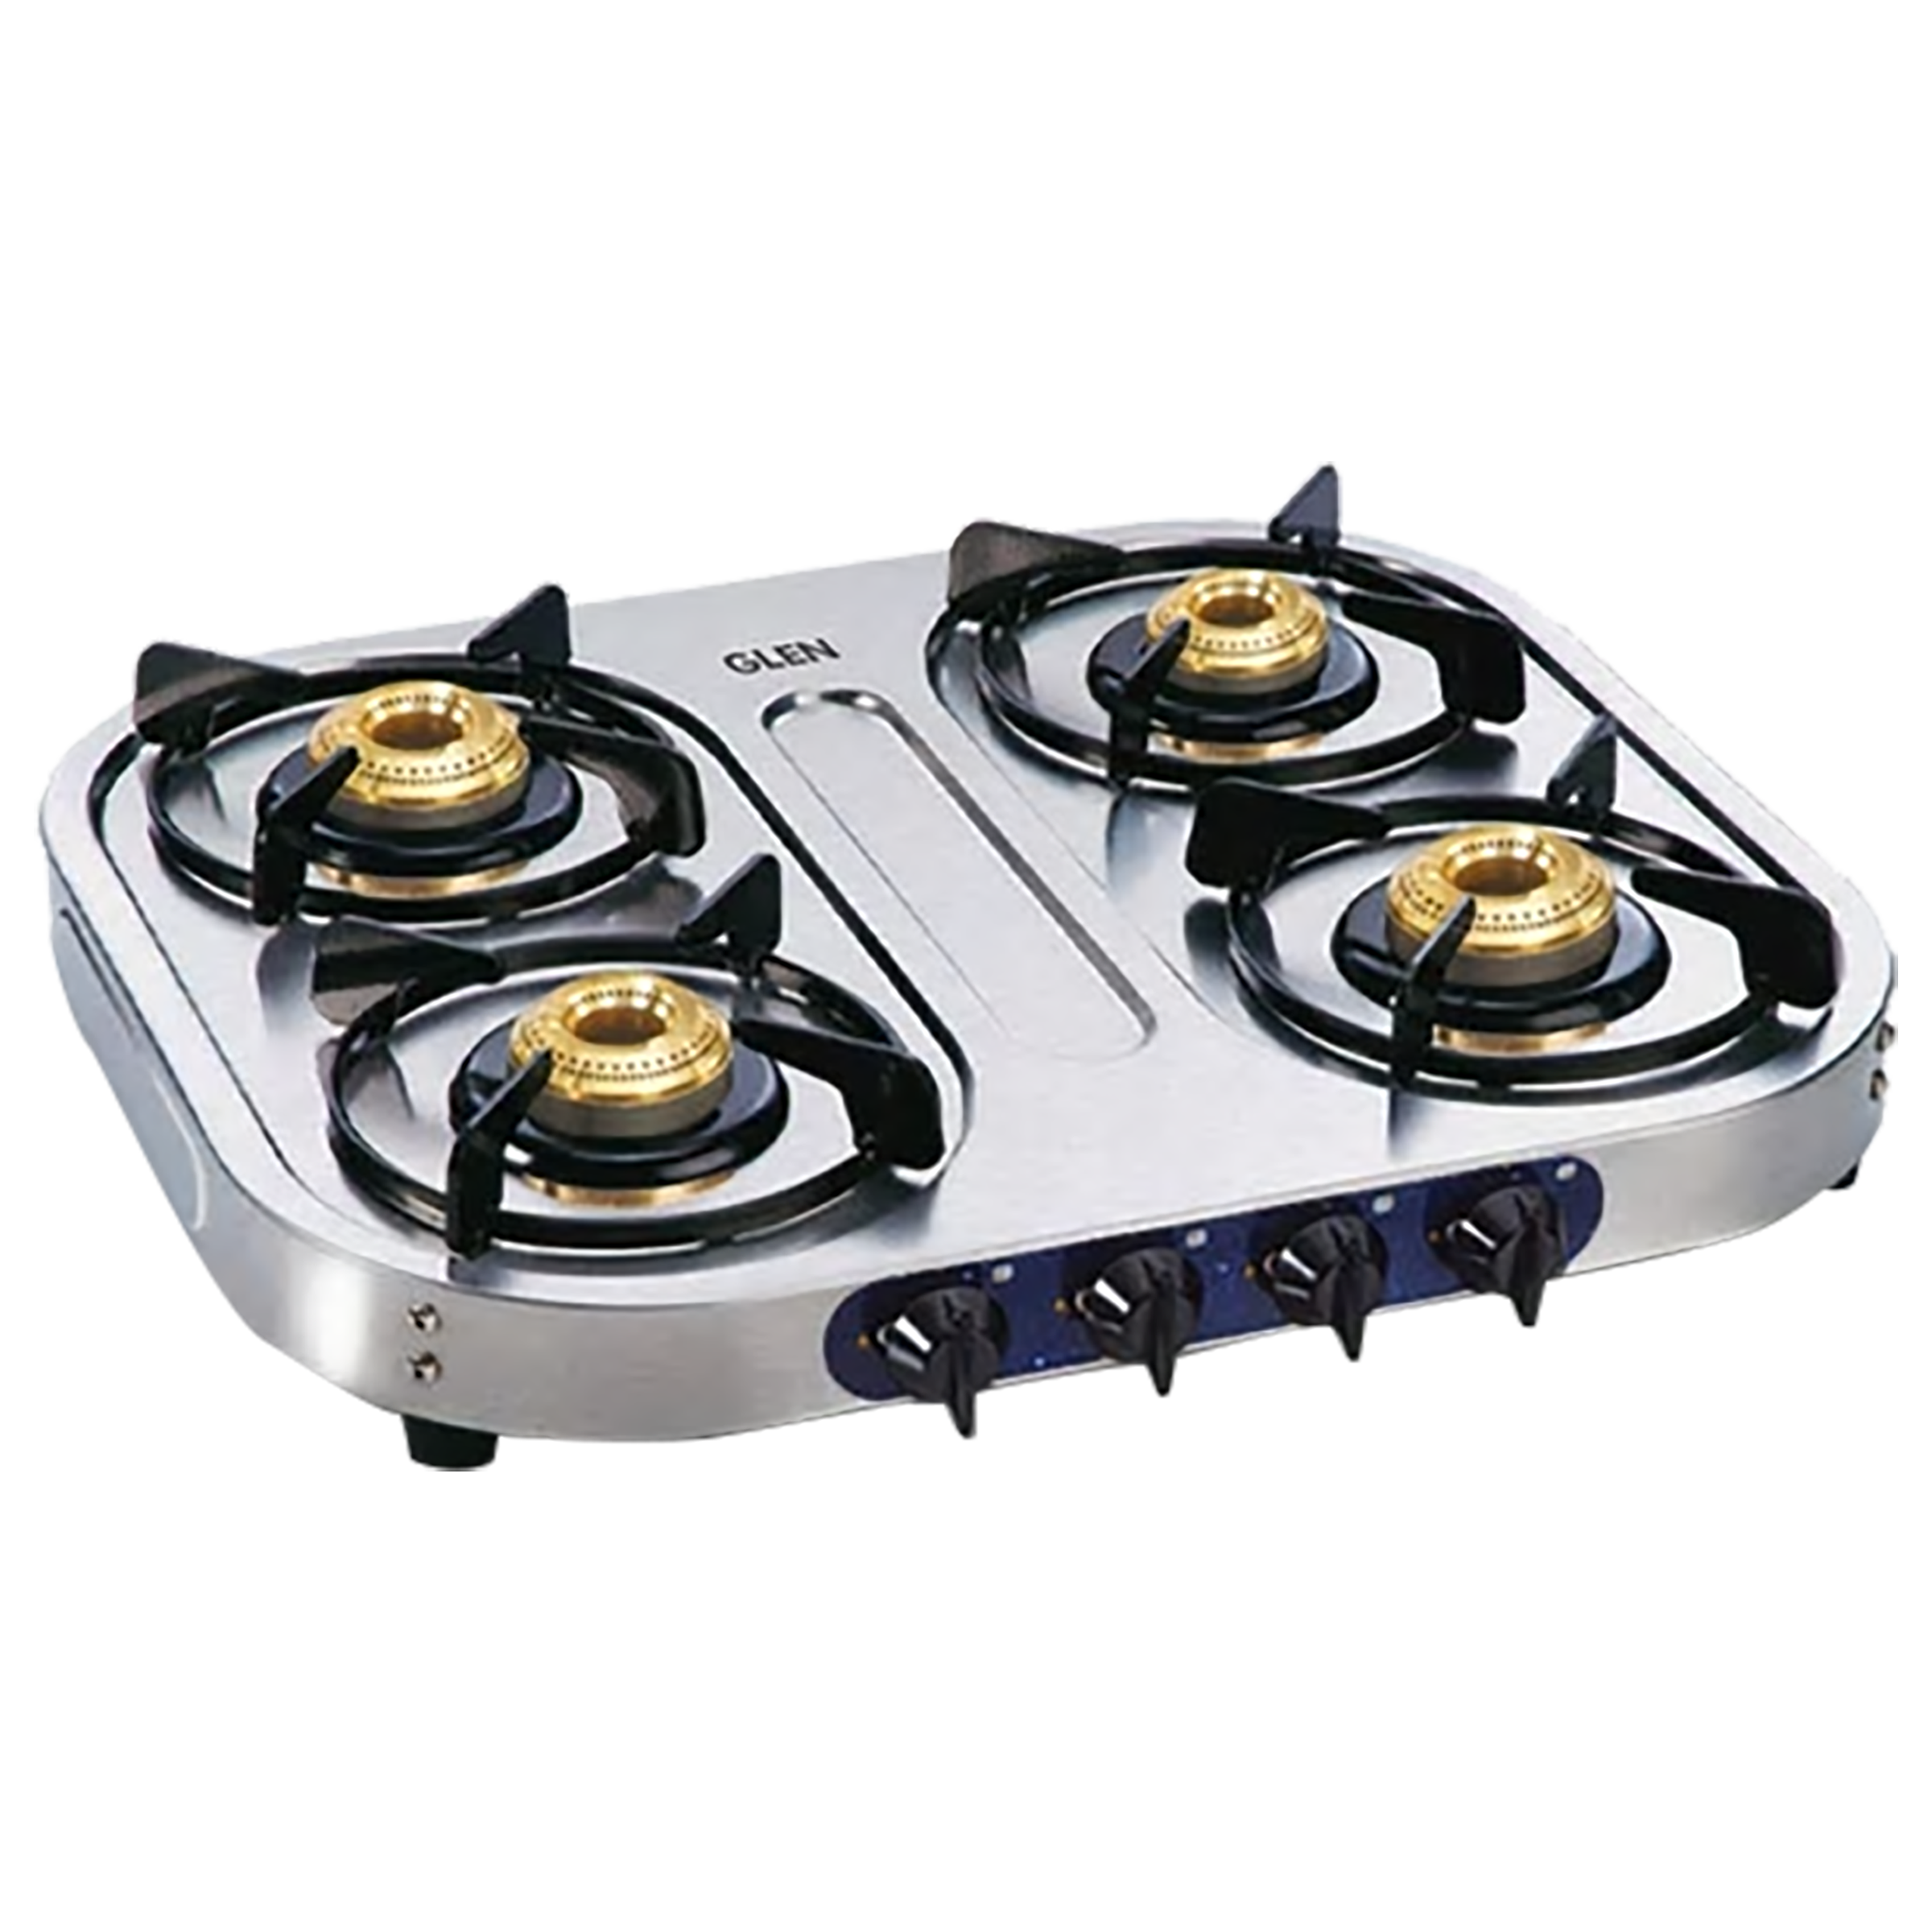 Glen CT1044SS 4 Burner Stainless Steel Gas Stove (ISI Certified, Silver)_1